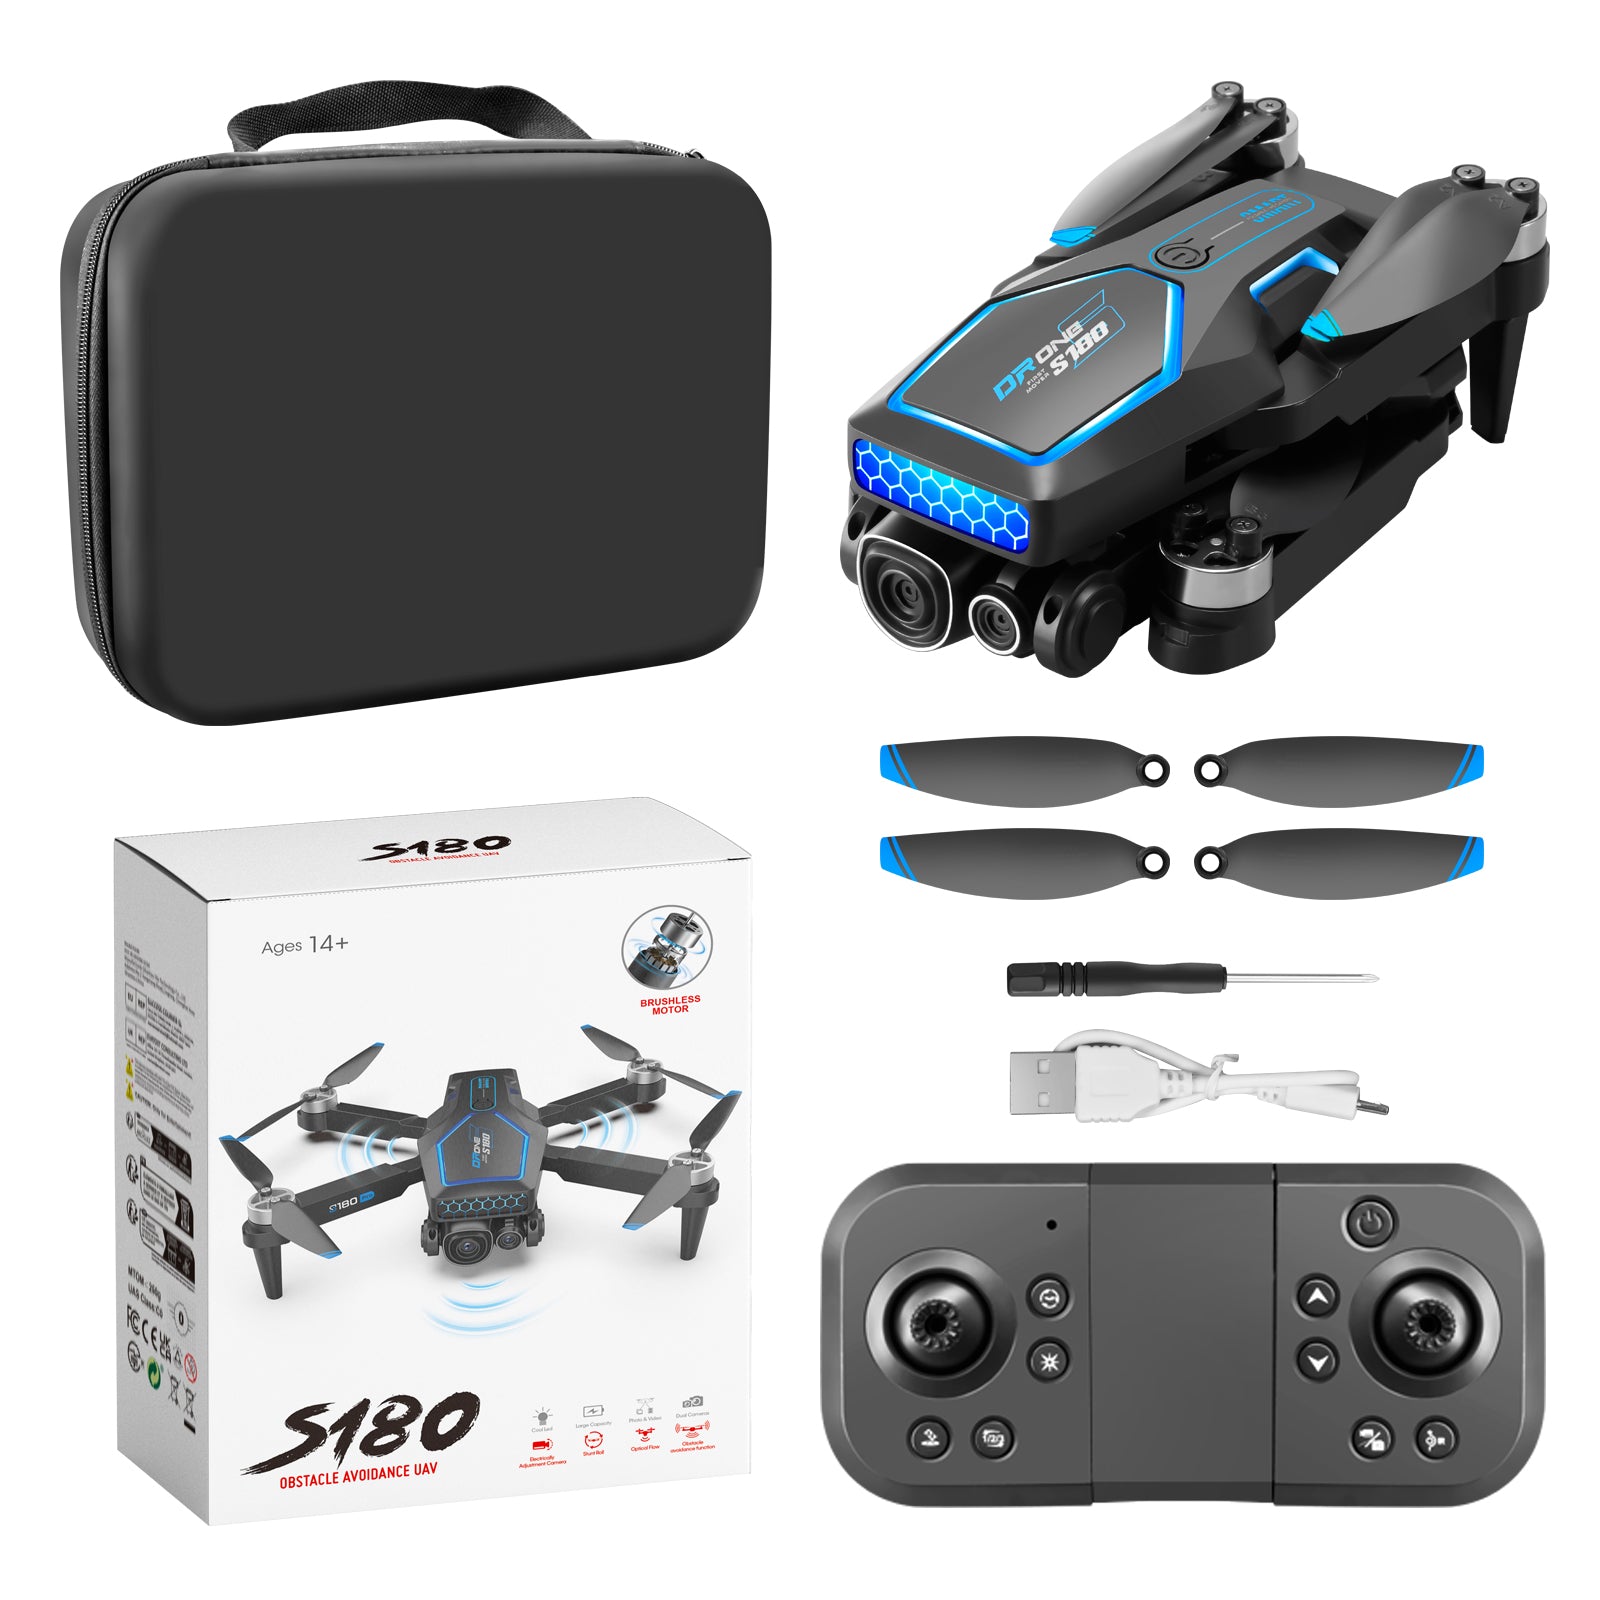 S180 Drone, Drone with obstacle detection and avoidance features for safe flying, suitable for adults aged 8-51.